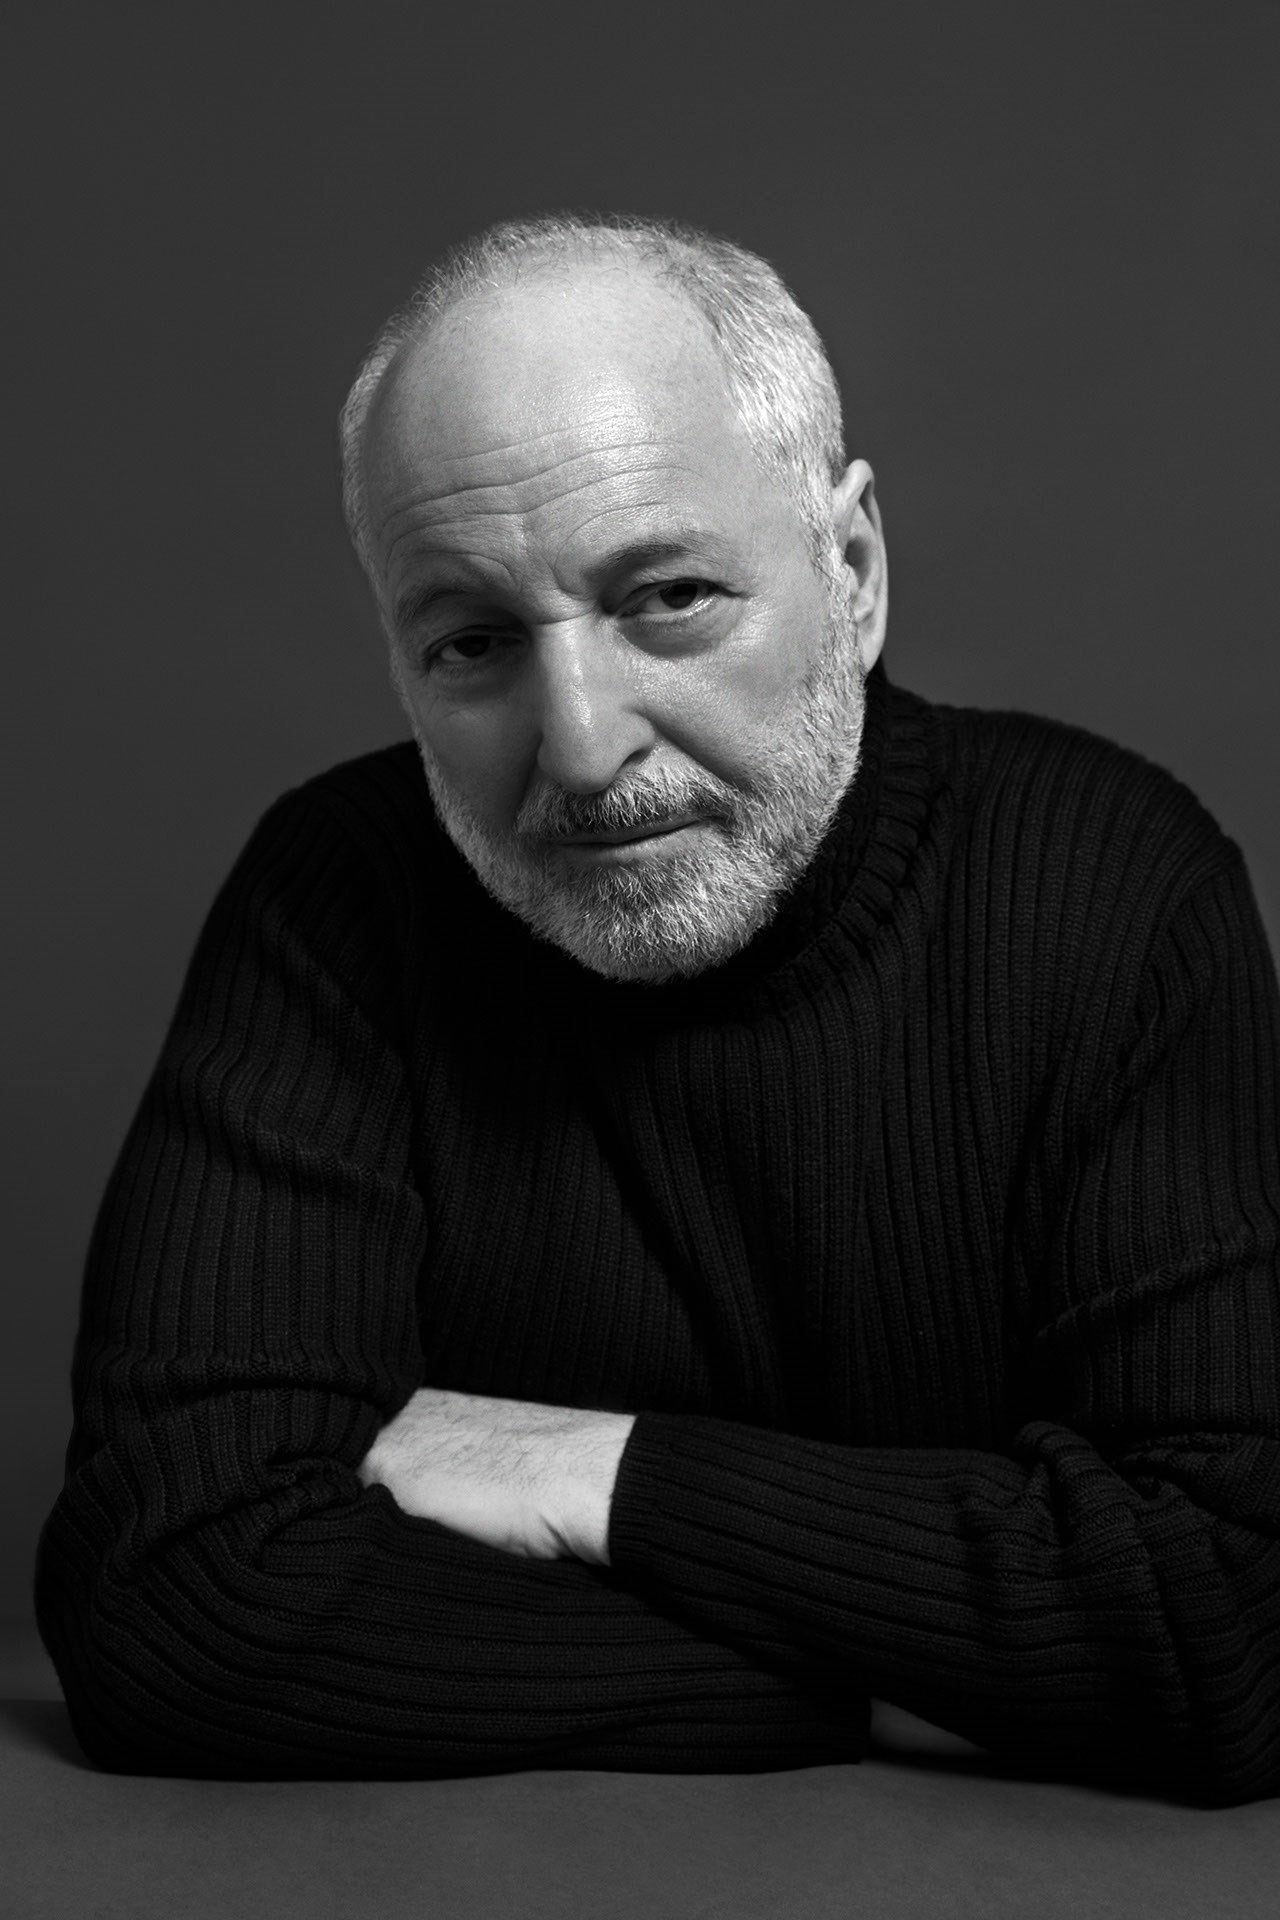 Author Photo Opt 2_Aciman, Andre (c) Ted Stansfield AnOther